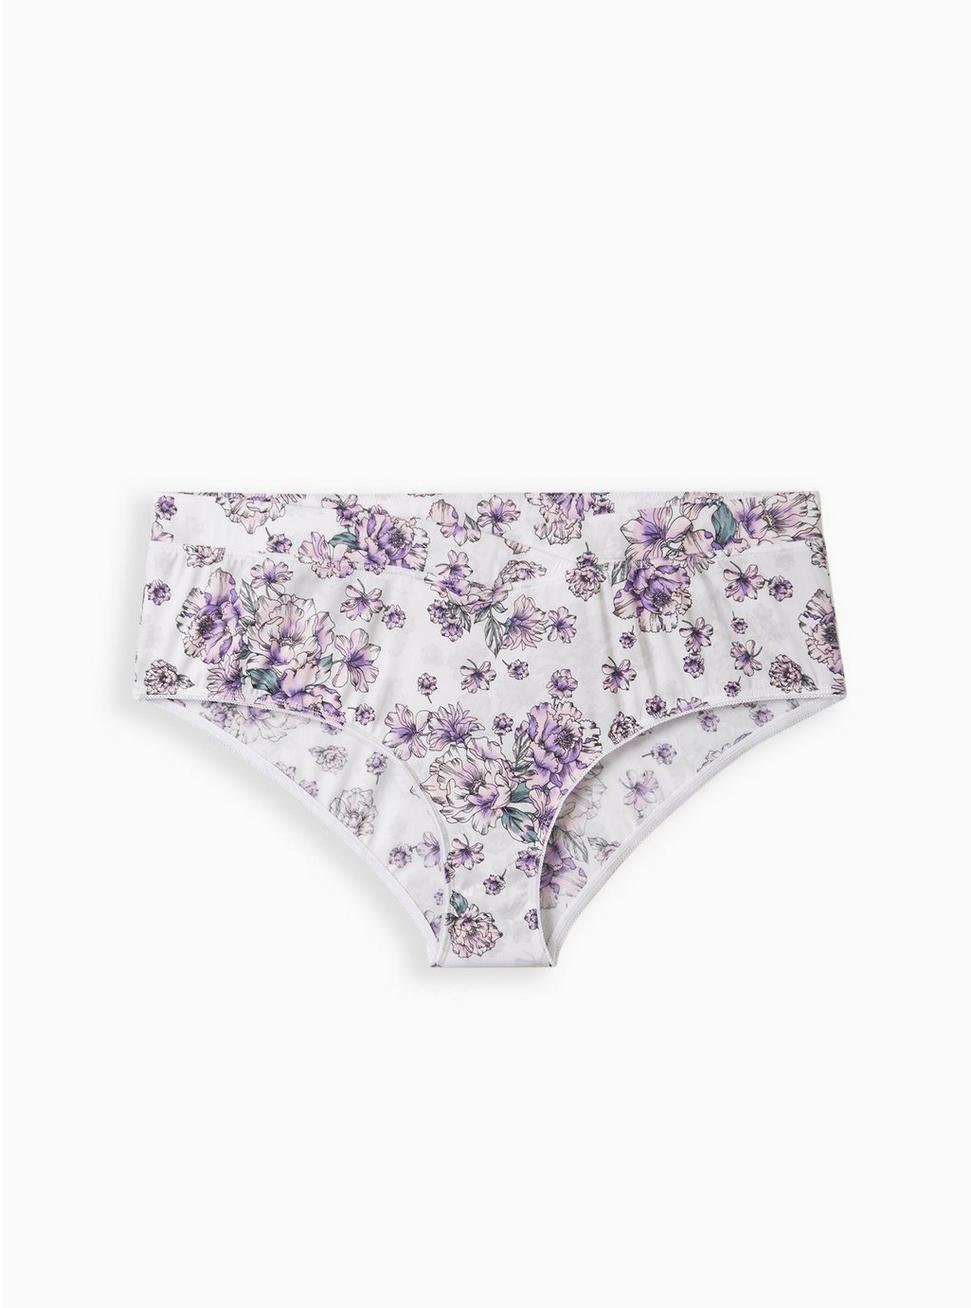 Microfiber Mid-Rise Cheeky Panty, WATERCOLOR EXPLOSION FLORAL BRIGHT WHITE, hi-res